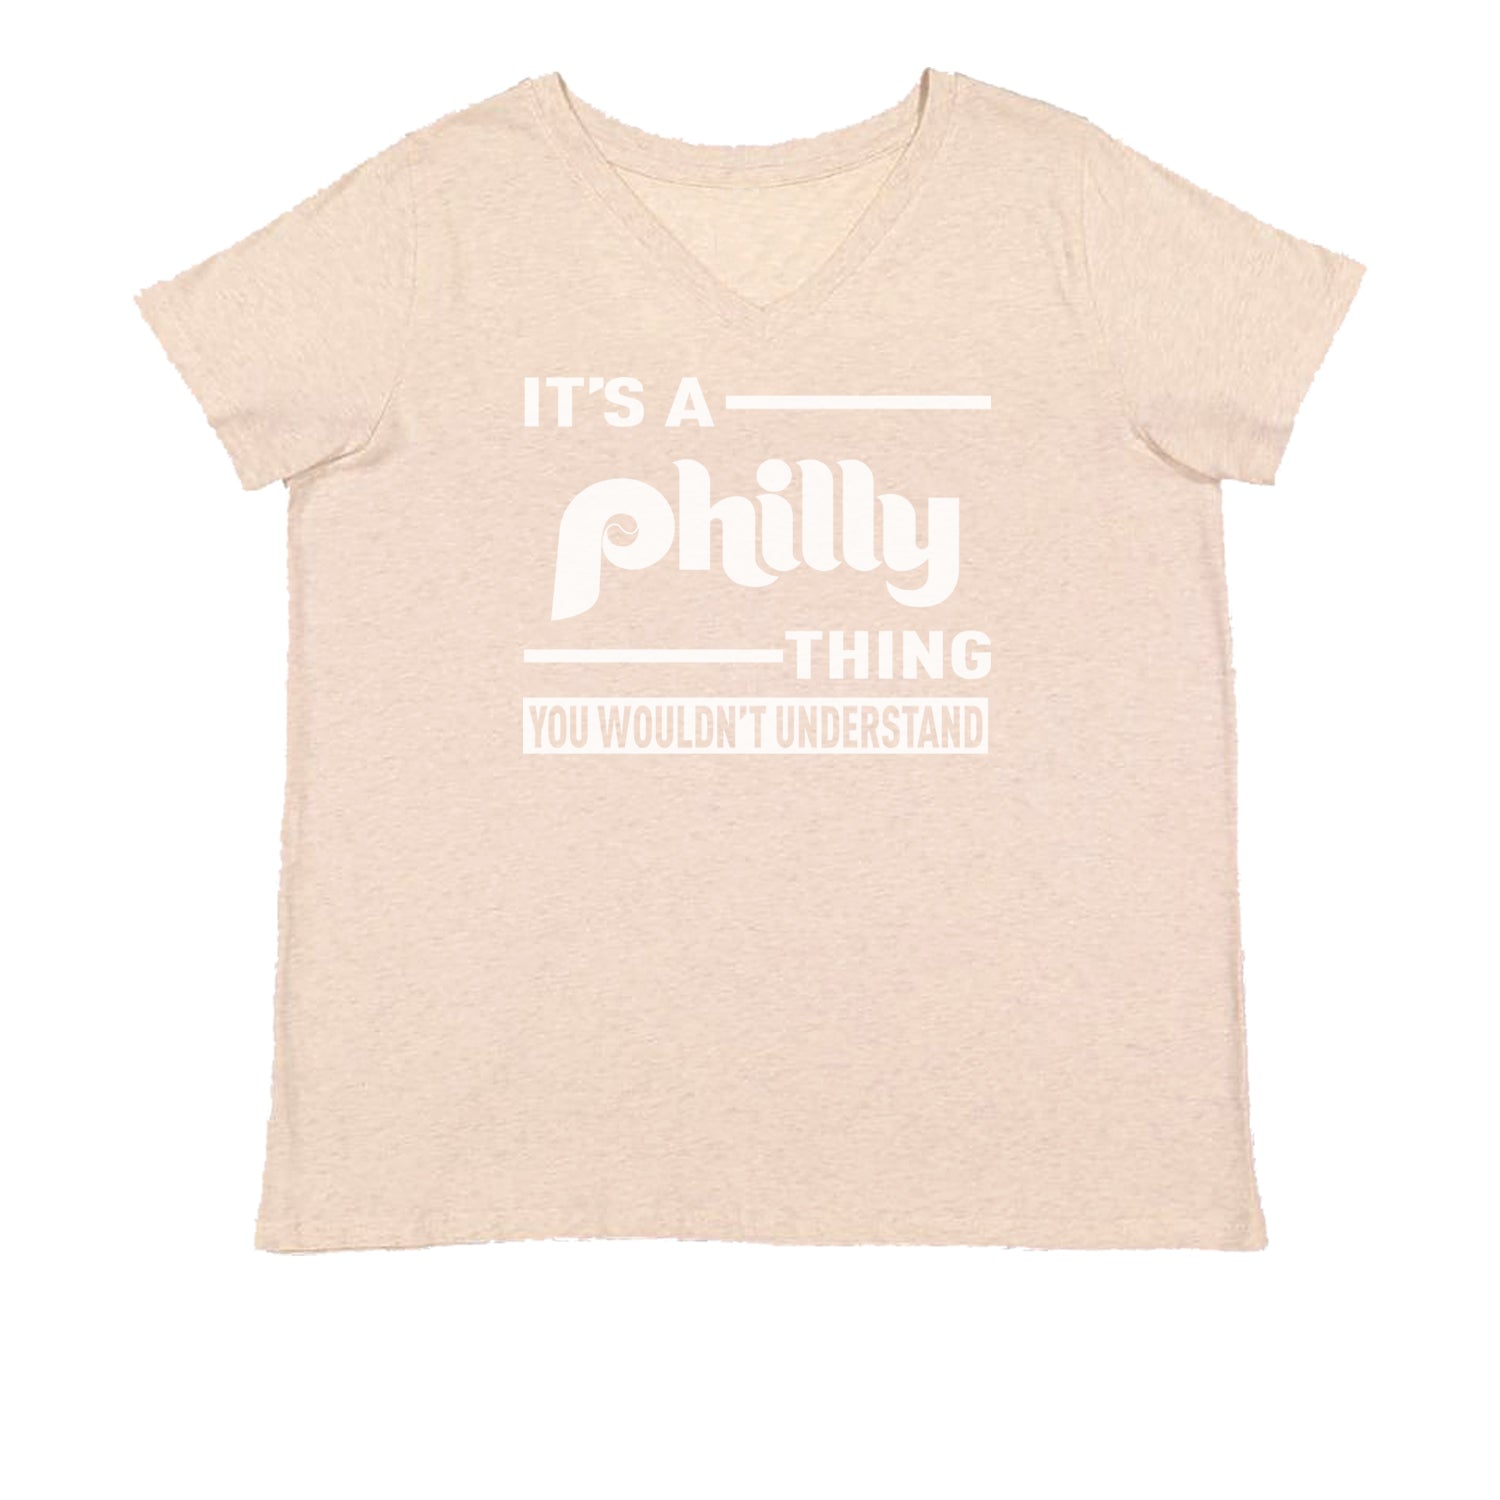 It's A Philly Thing, You Wouldn't Understand Womens Plus Size V-Neck T-shirt baseball, filly, football, jawn, morgan, Philadelphia, philli by Expression Tees